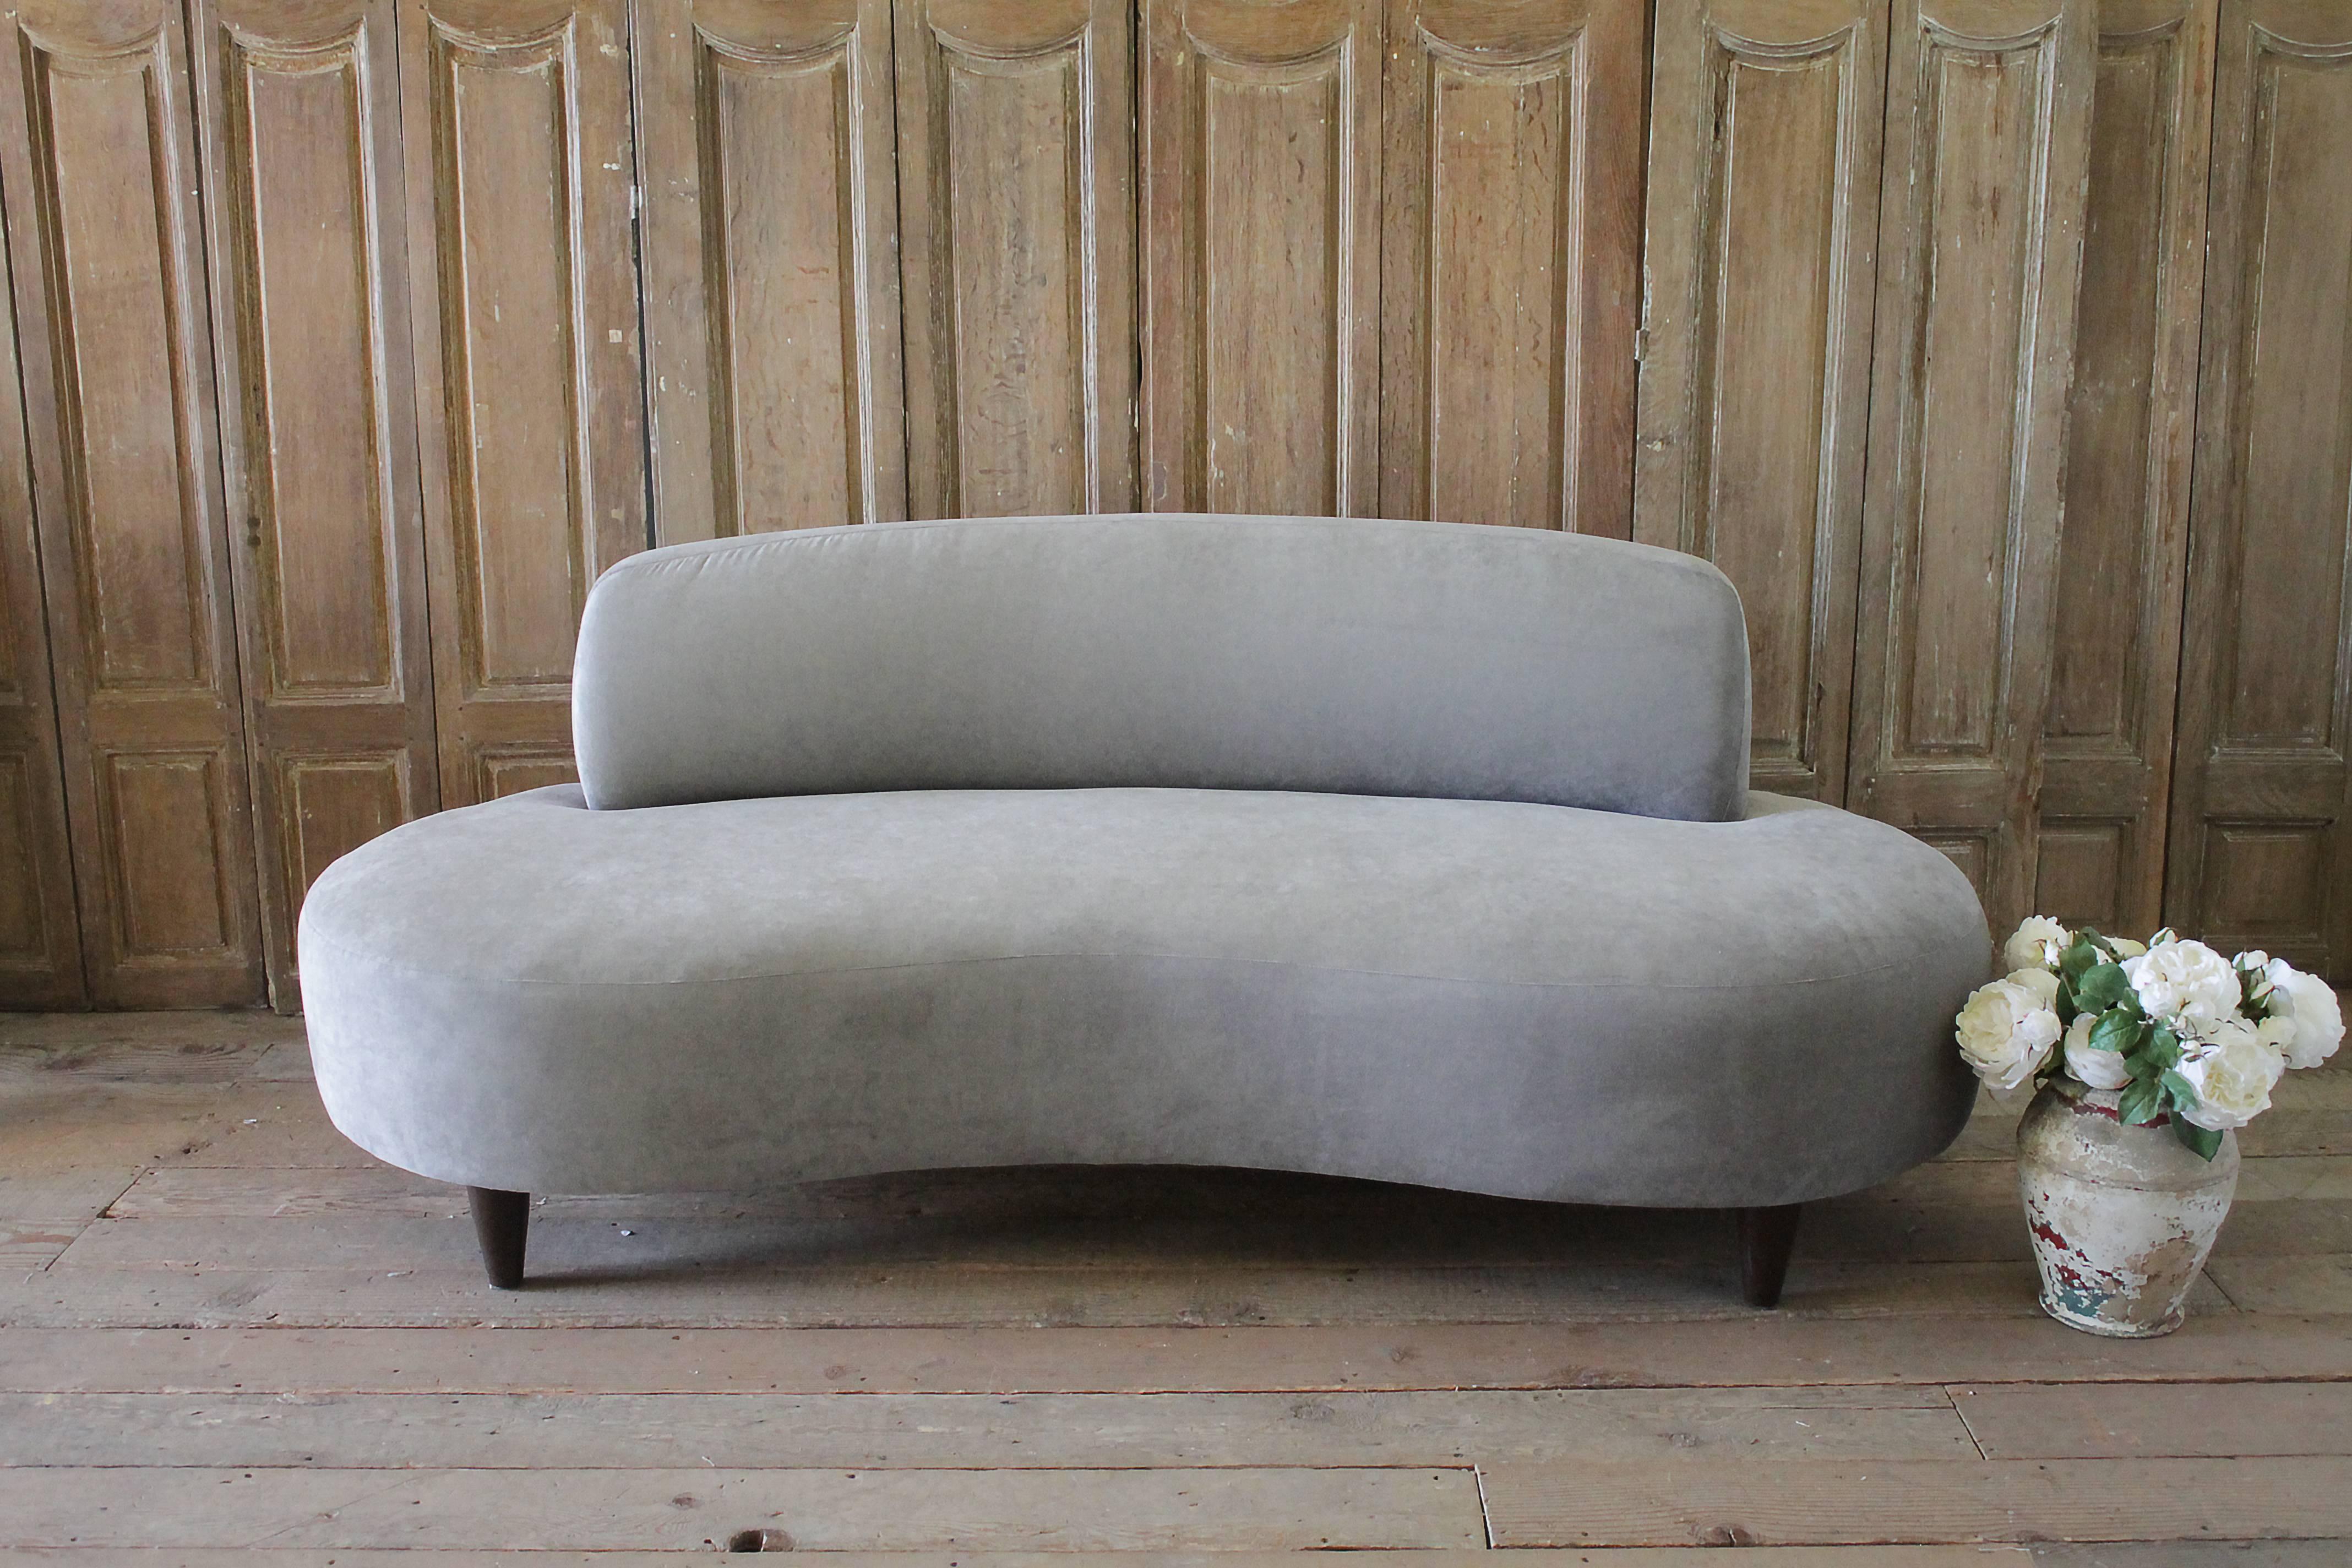 Vintage Noguchi style free-form sofa in pale grey velvet
We reupholstered this in a pale grey velvet, the legs are wood in a medium colored walnut color.
Measures: 80